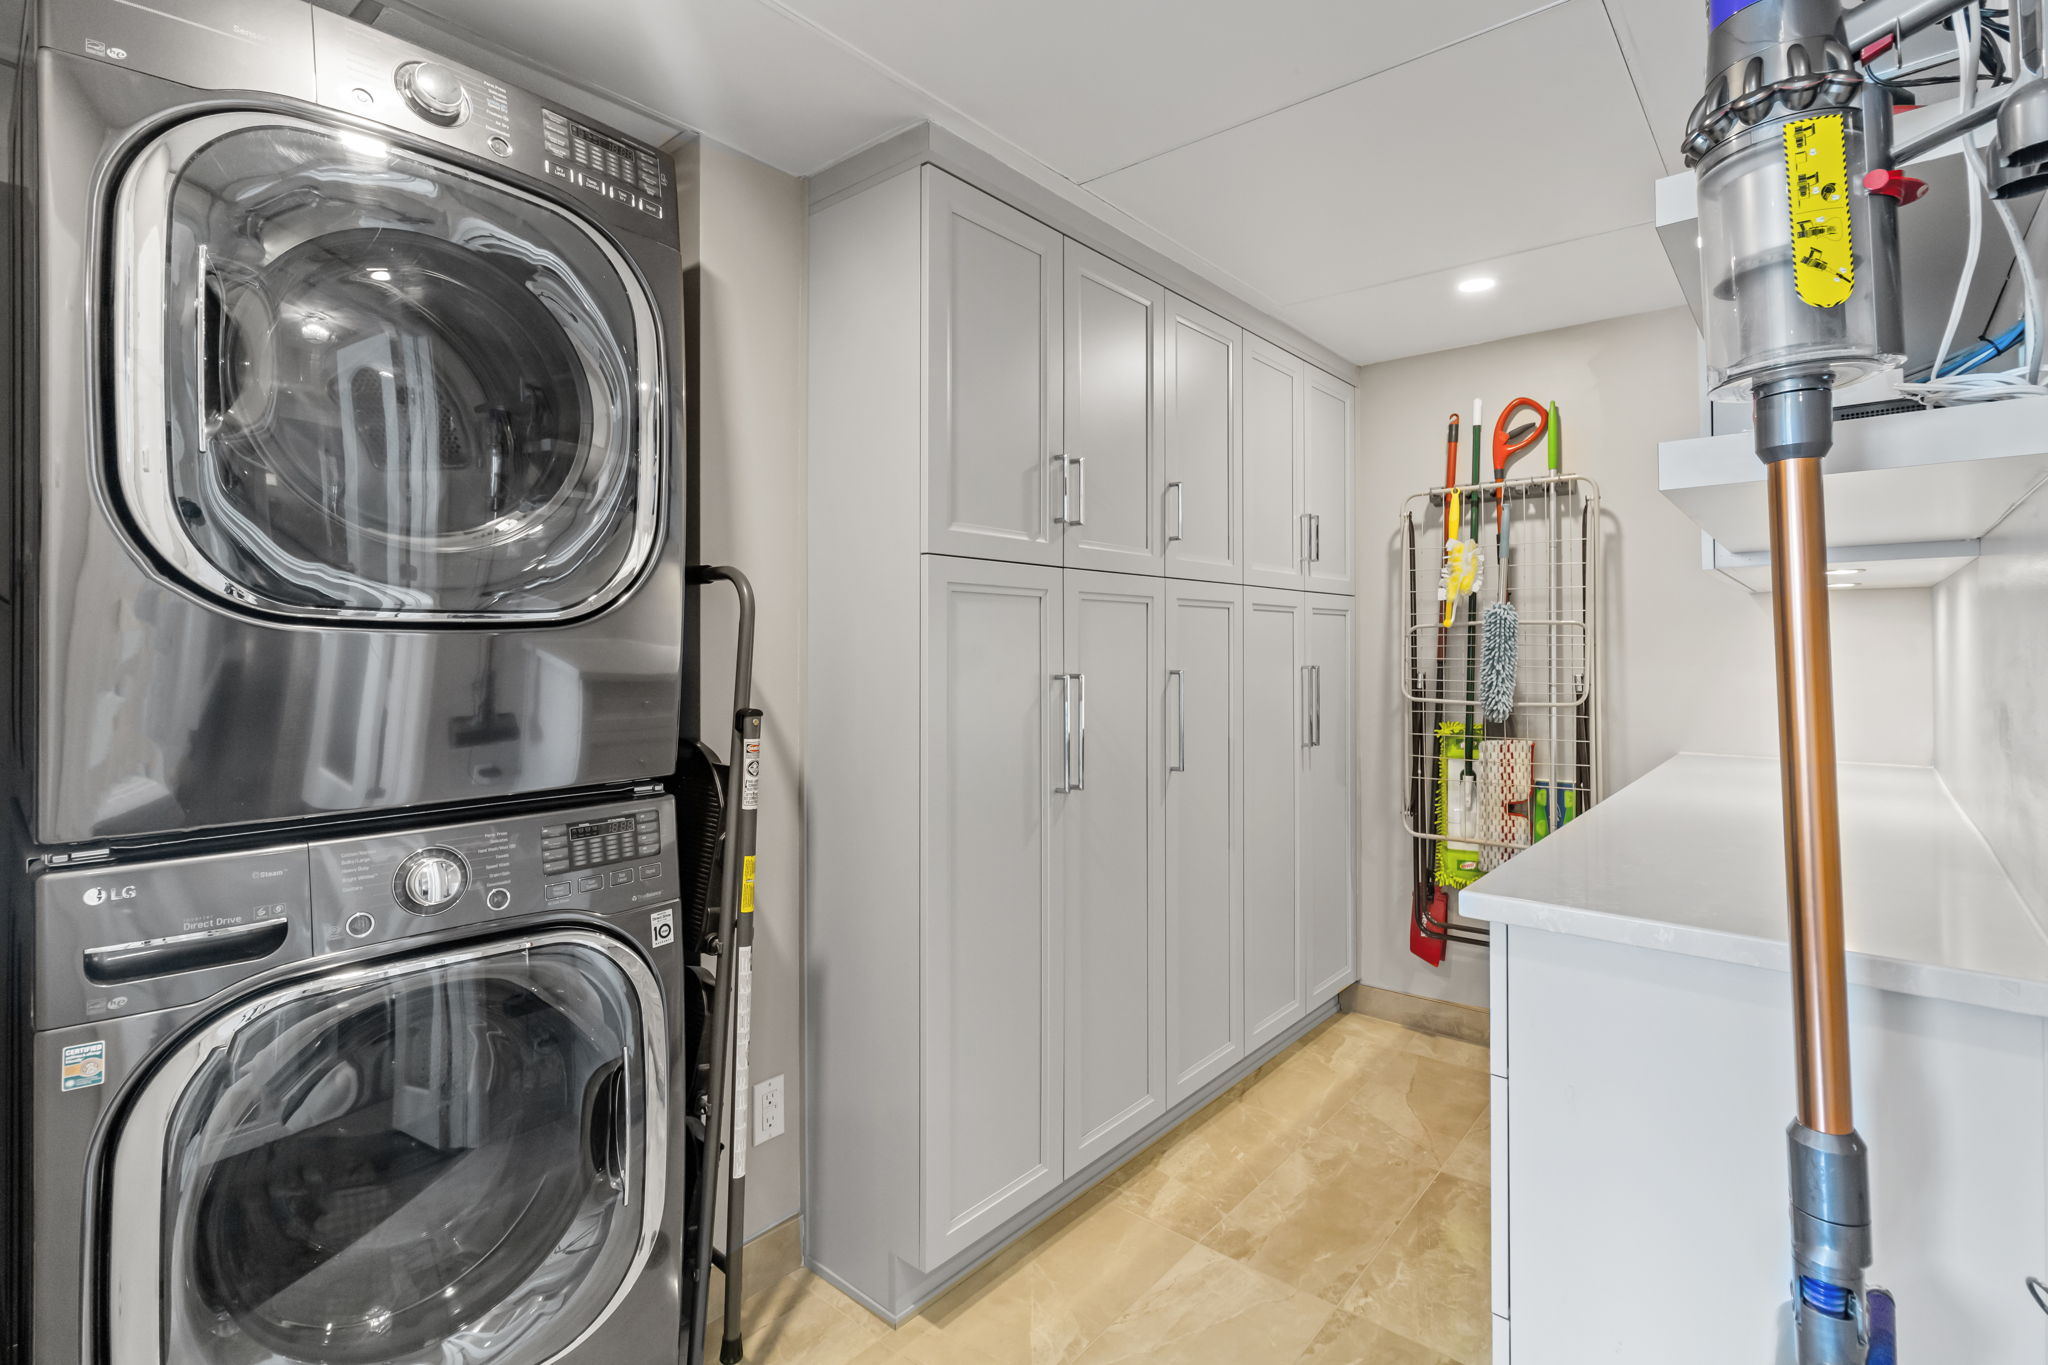 Utility/Laundry Room - tons of storage